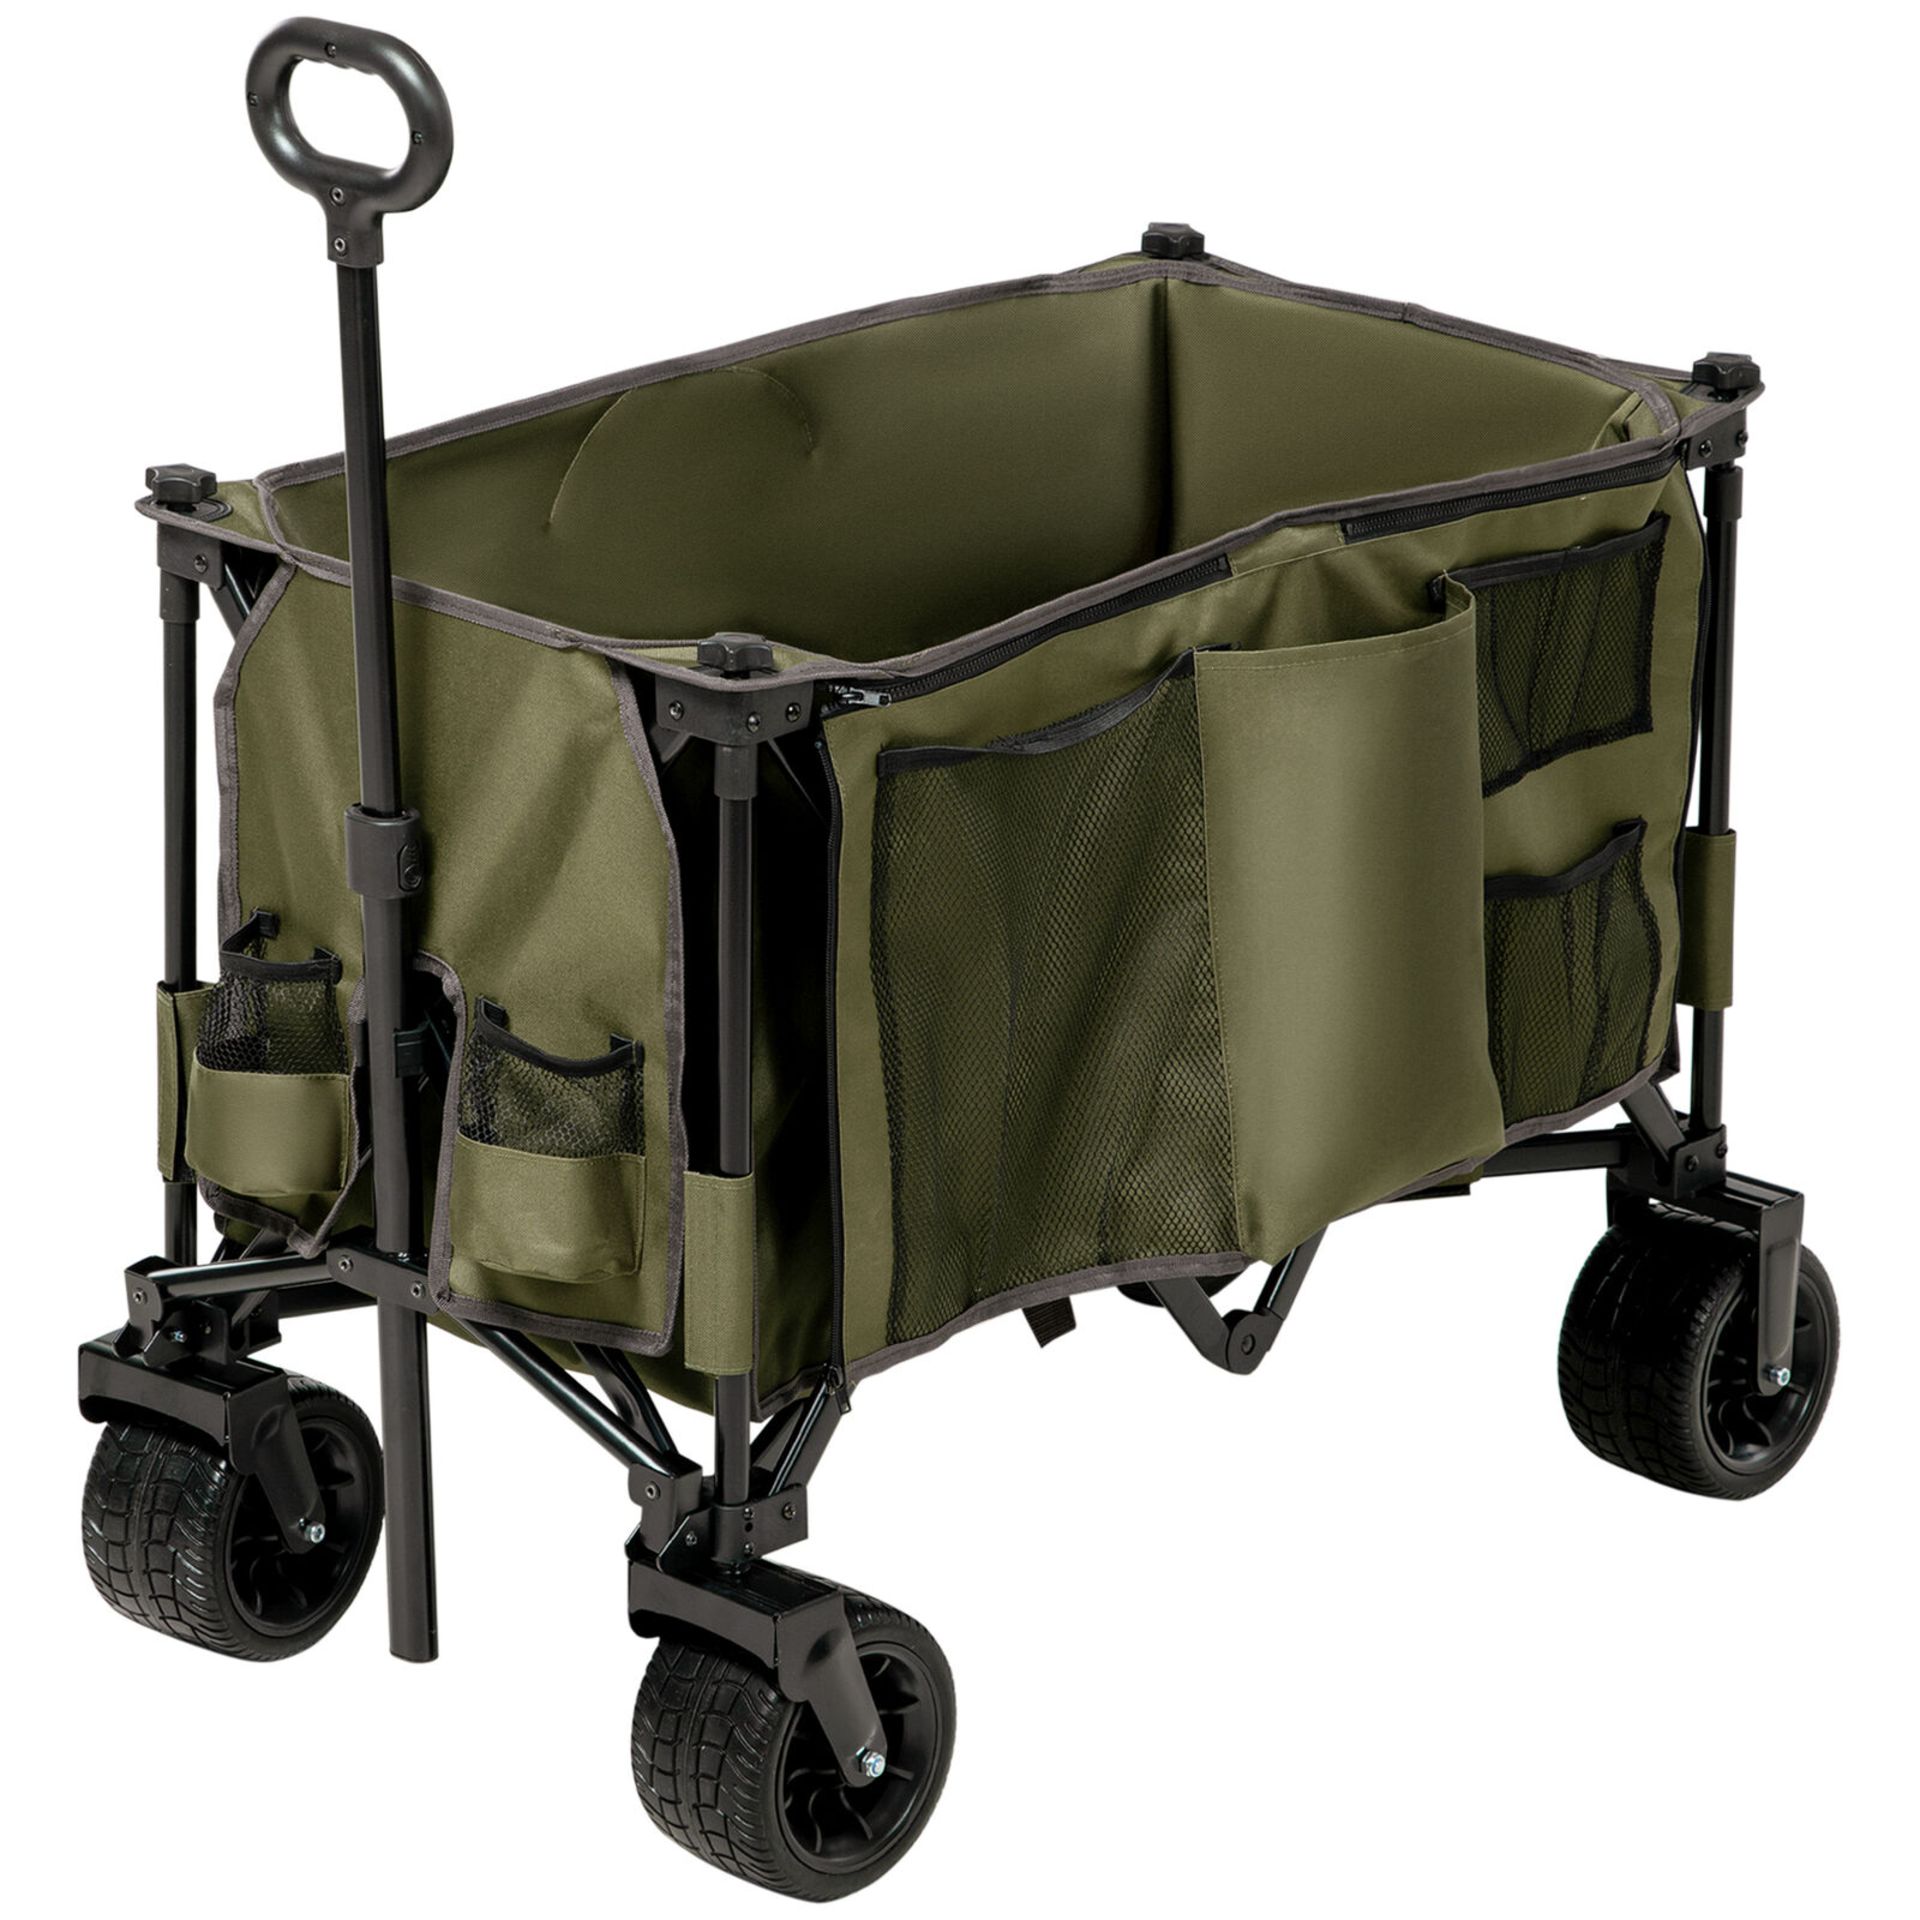 **NEW**FOLDING WAGON GARTEN CART COLLAPSIBLE CAMPING TROLLEY ON WHEELS, GREEN>>DELIVERY AVAILABLE<< - Image 2 of 2